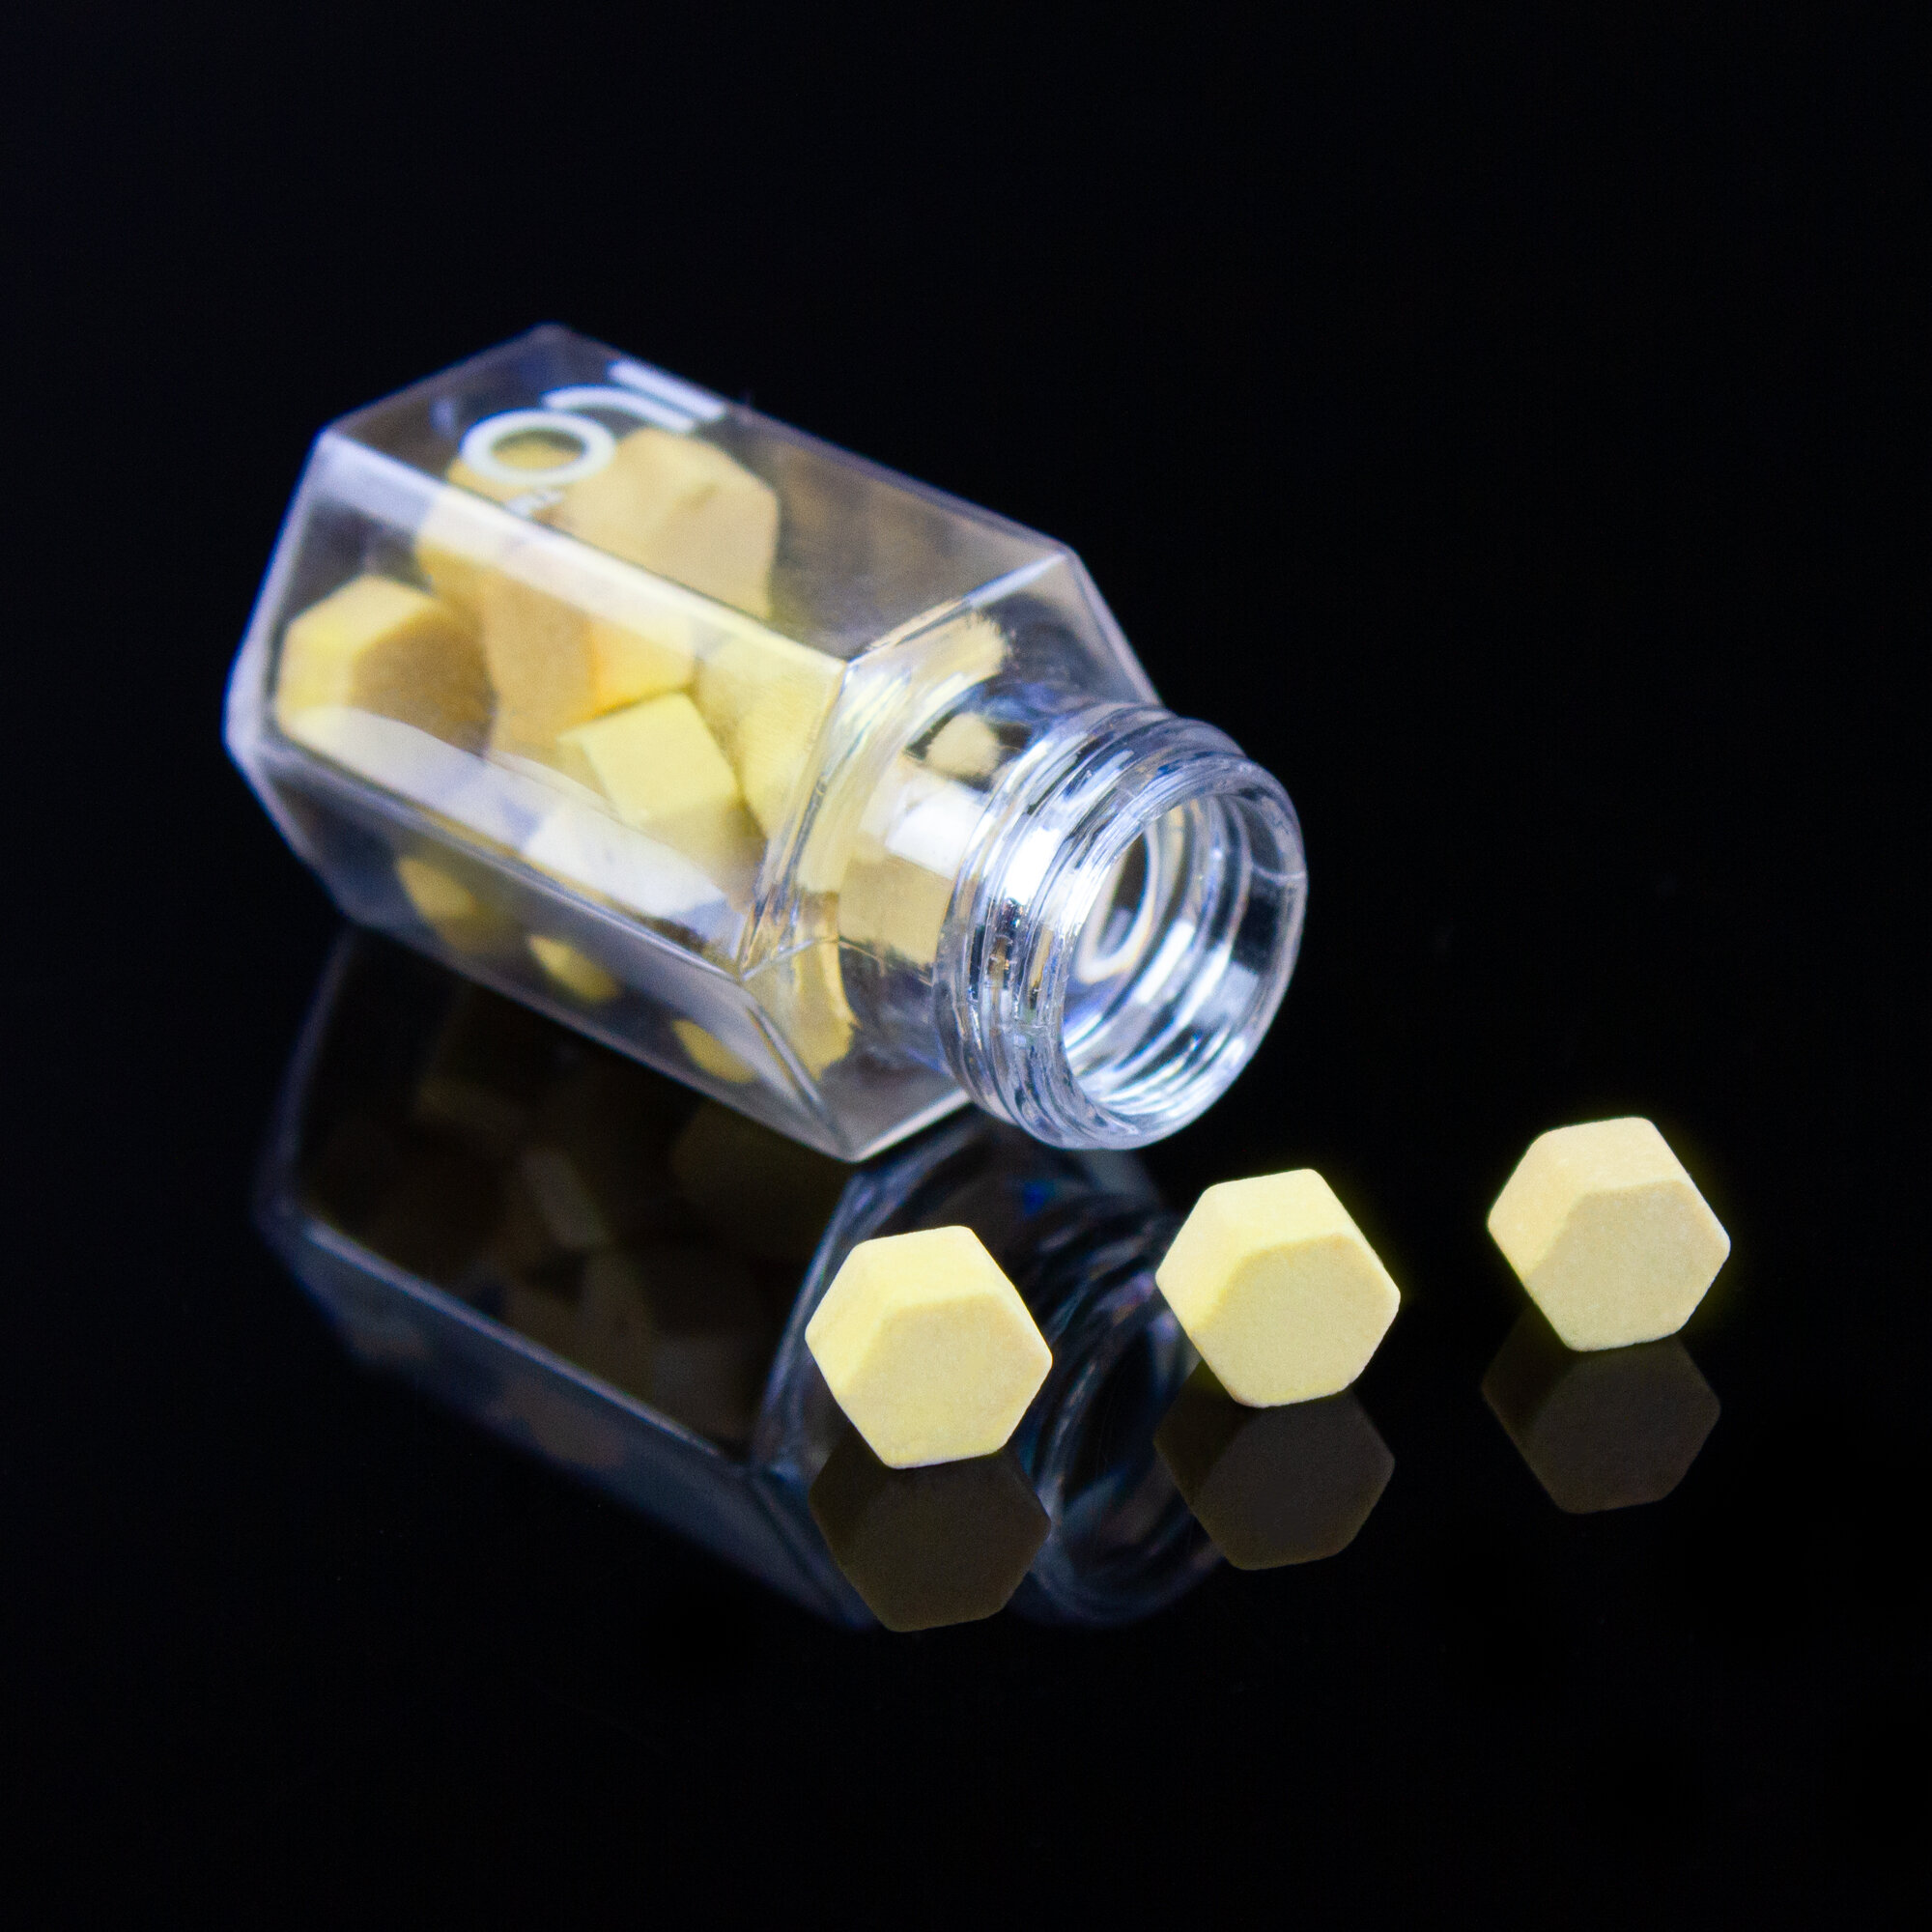 Dabtabs-in-Vial-on-Reflective_1-Square.jpg